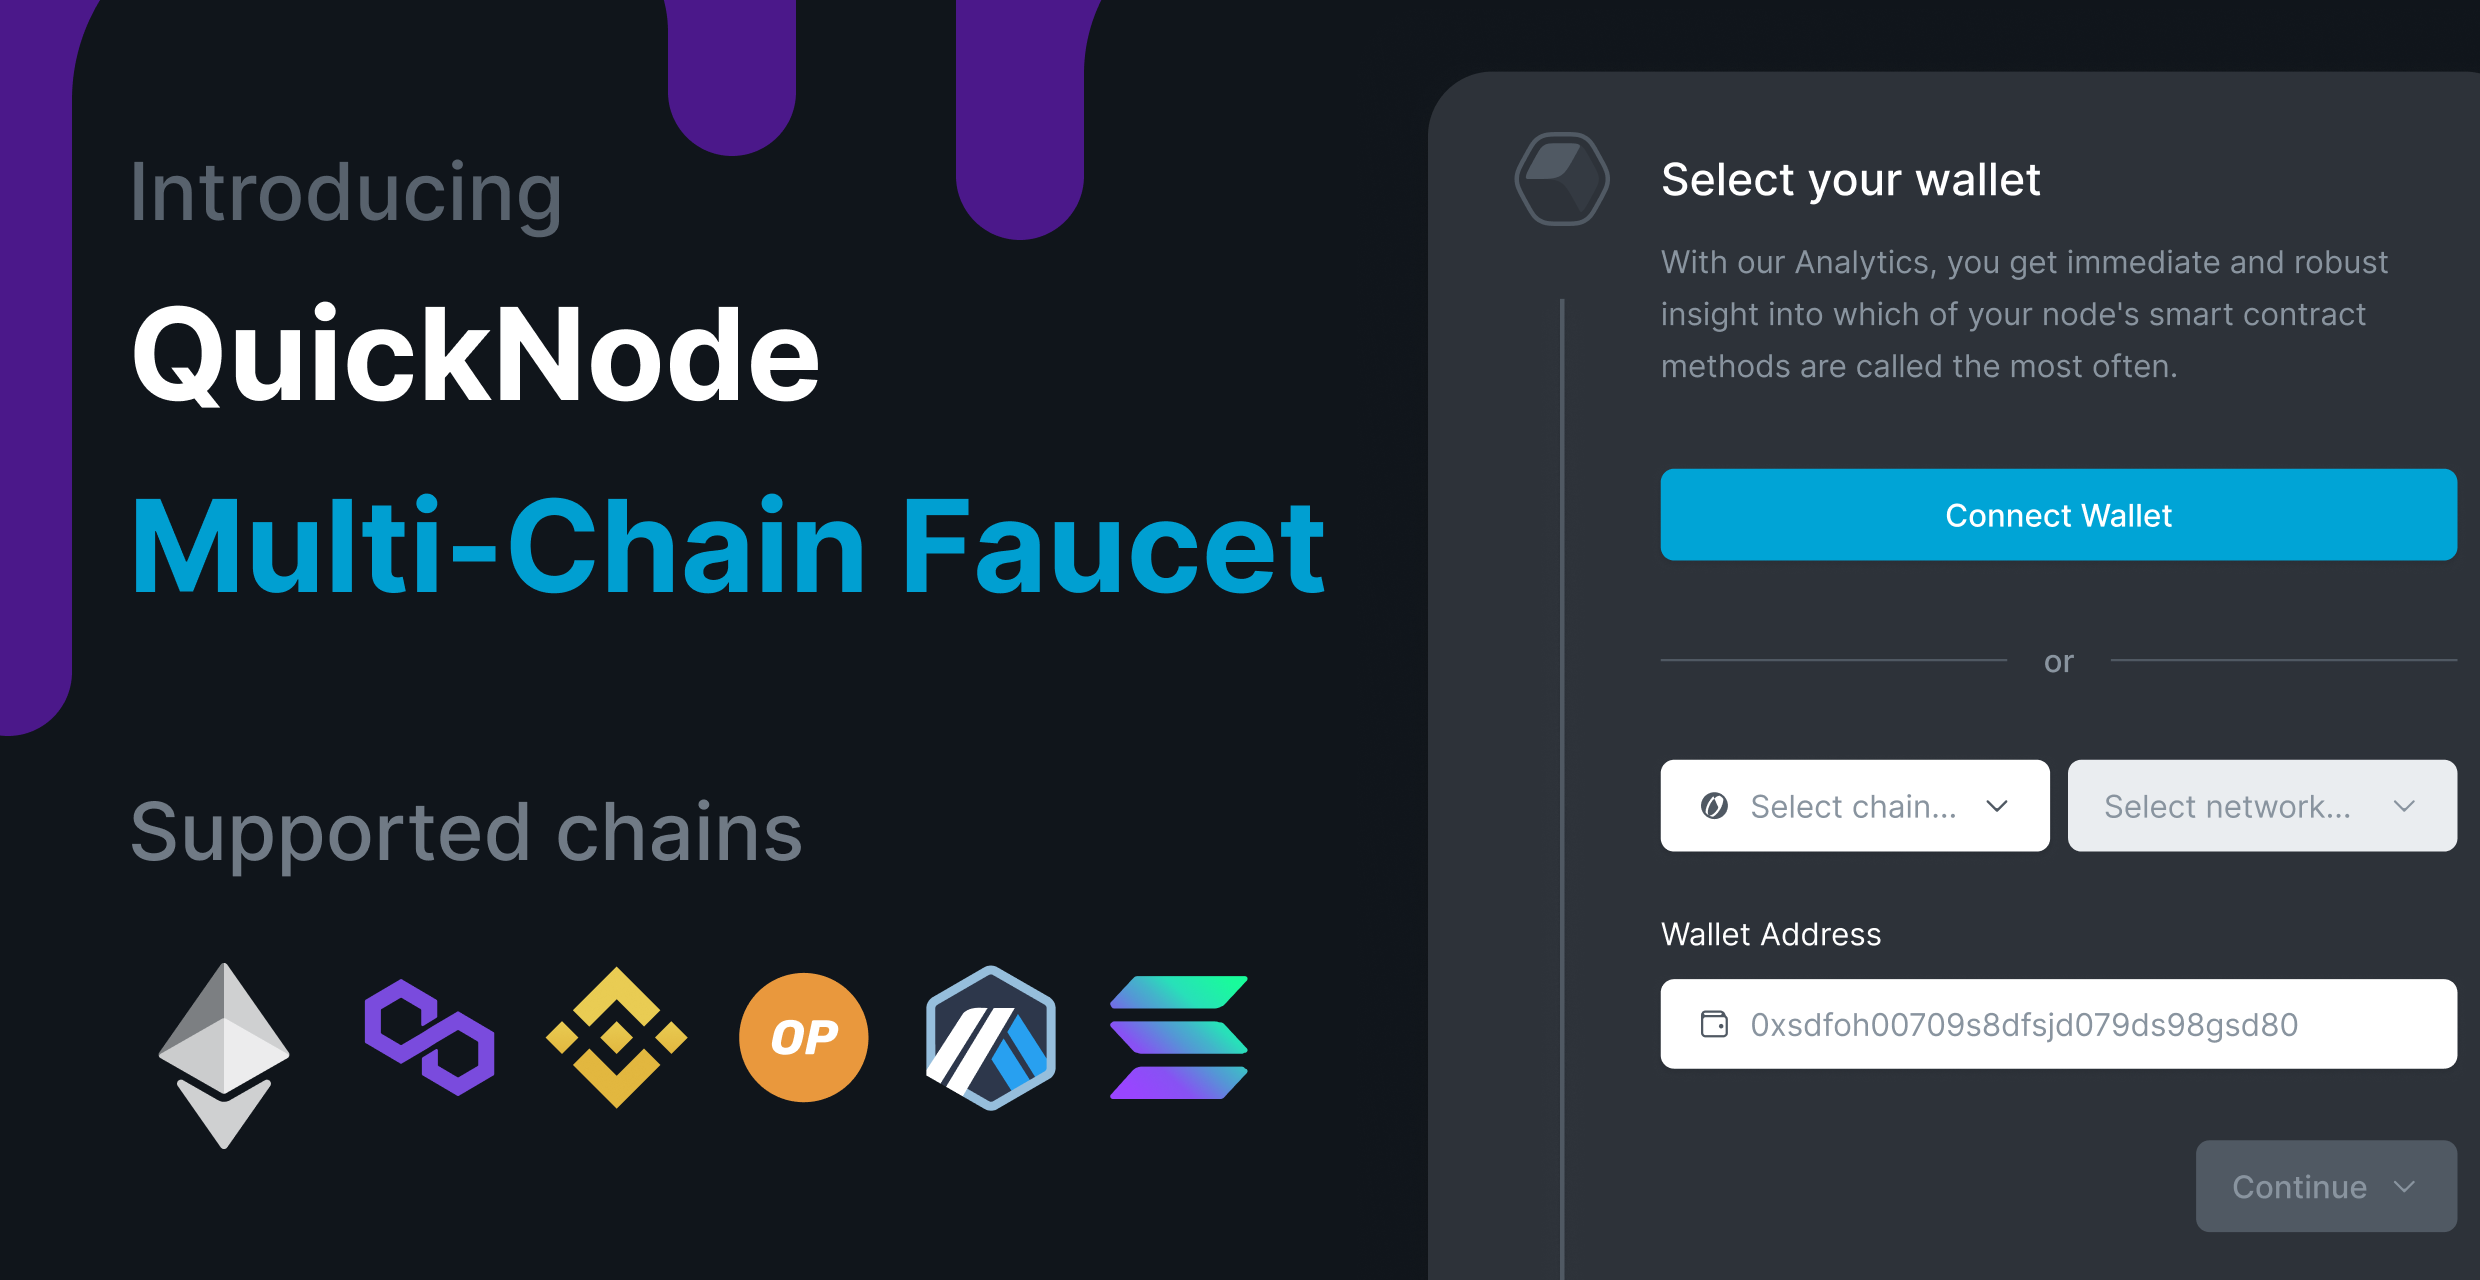 New networks added to QuickNode Faucet